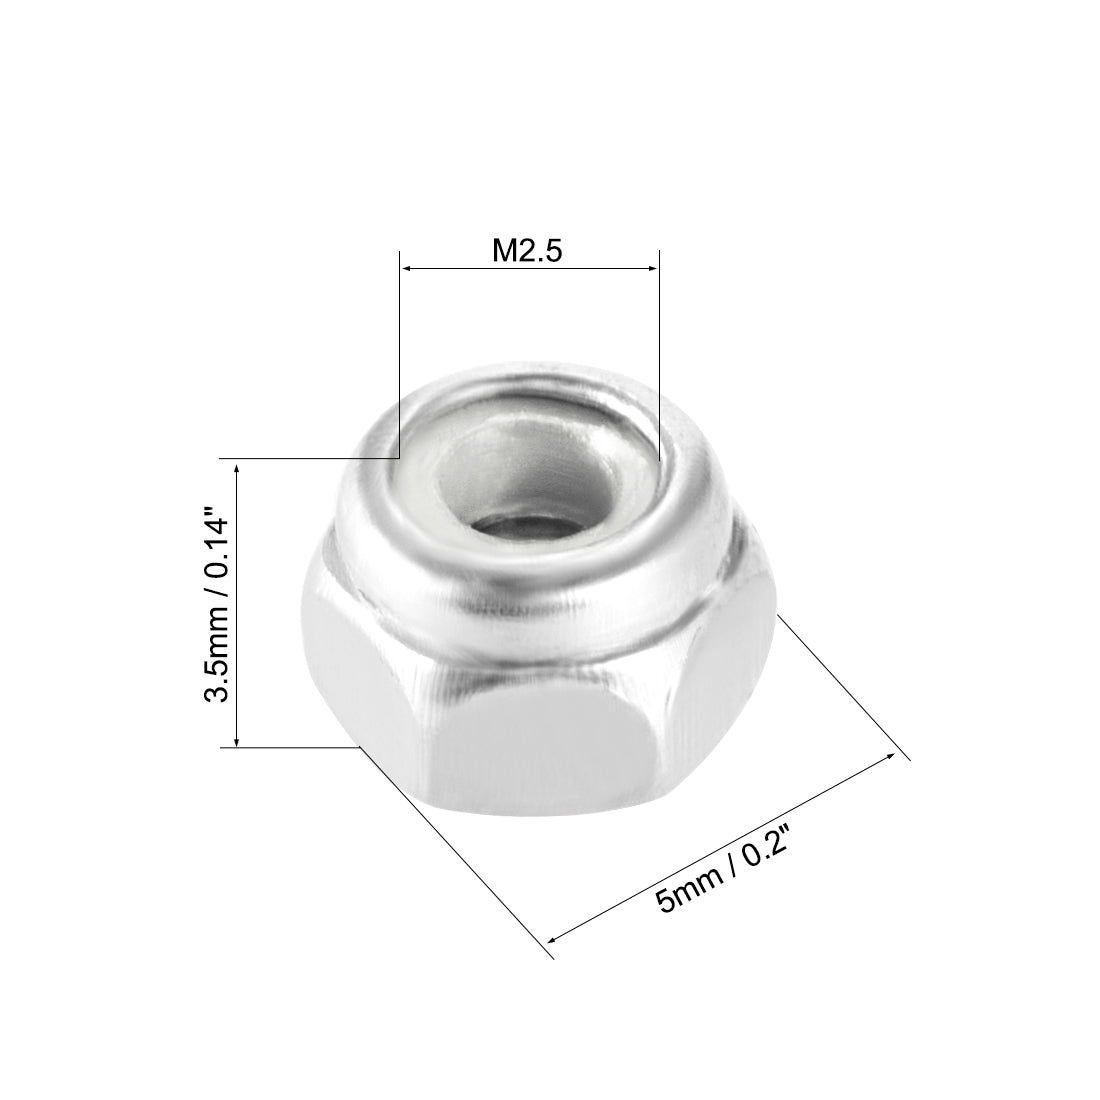 uxcell Uxcell M2.5x0.45mm Hex Lock Nut Stainless Steel Nylon Insert Self-Lock Nut 50Pcs Silver